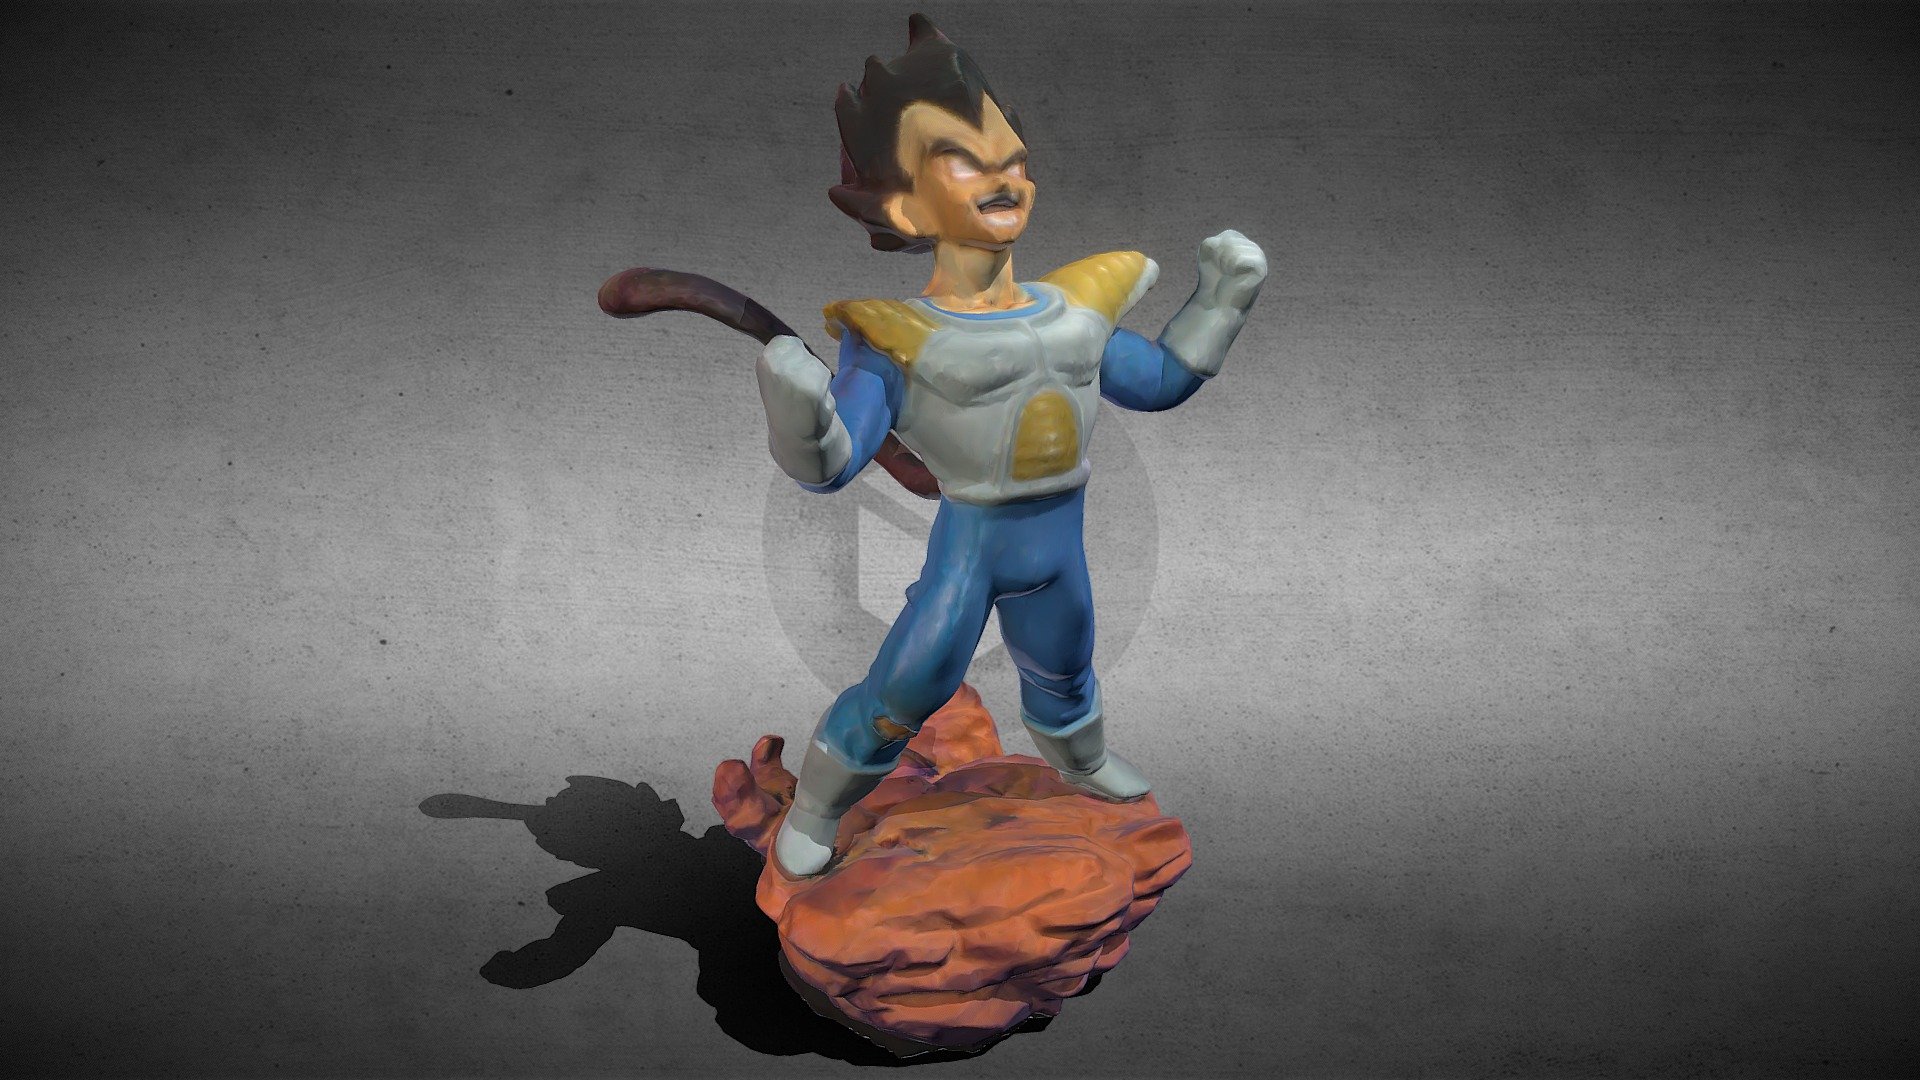 3d Scan using Einscan Turntable and post processing in Zbrush for optimization. Actual figure stands roughly 4 inches tall. 3D printable. Character is Vegeta from Dragonball Z. Vertex Colors 3d model